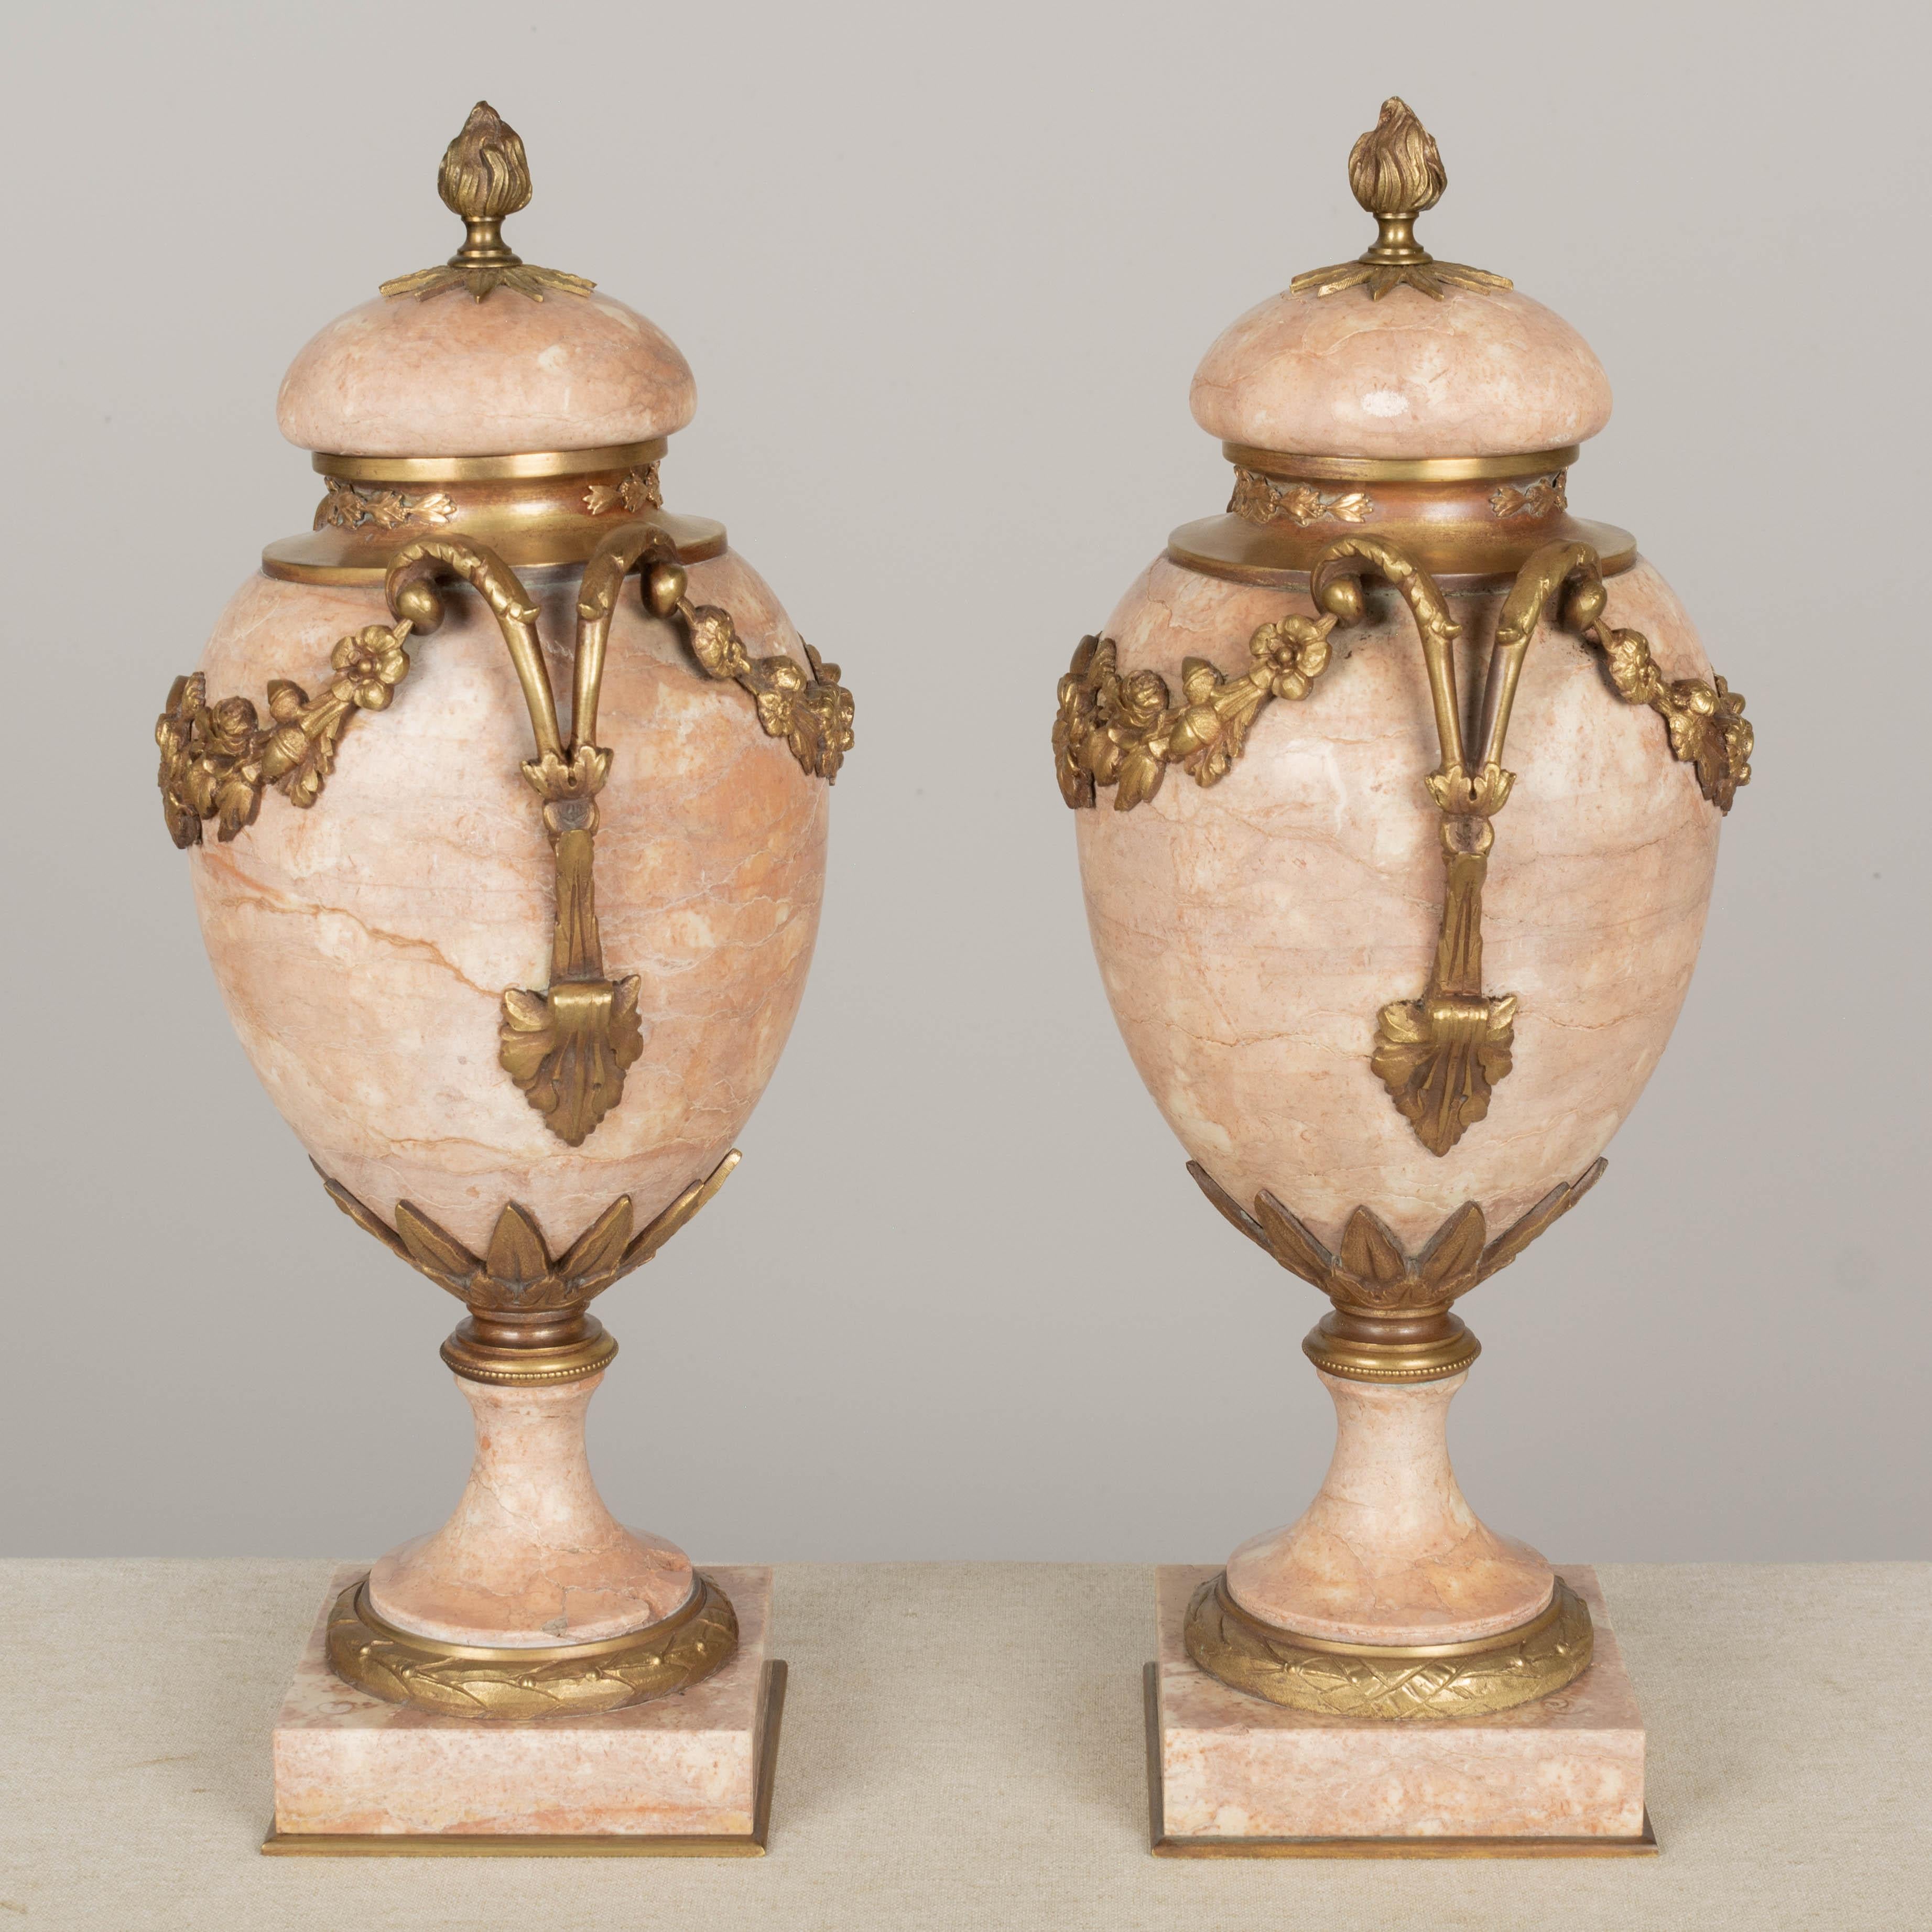 19th Century French Marble and Ormolu Cassolettes Pair In Good Condition For Sale In Winter Park, FL